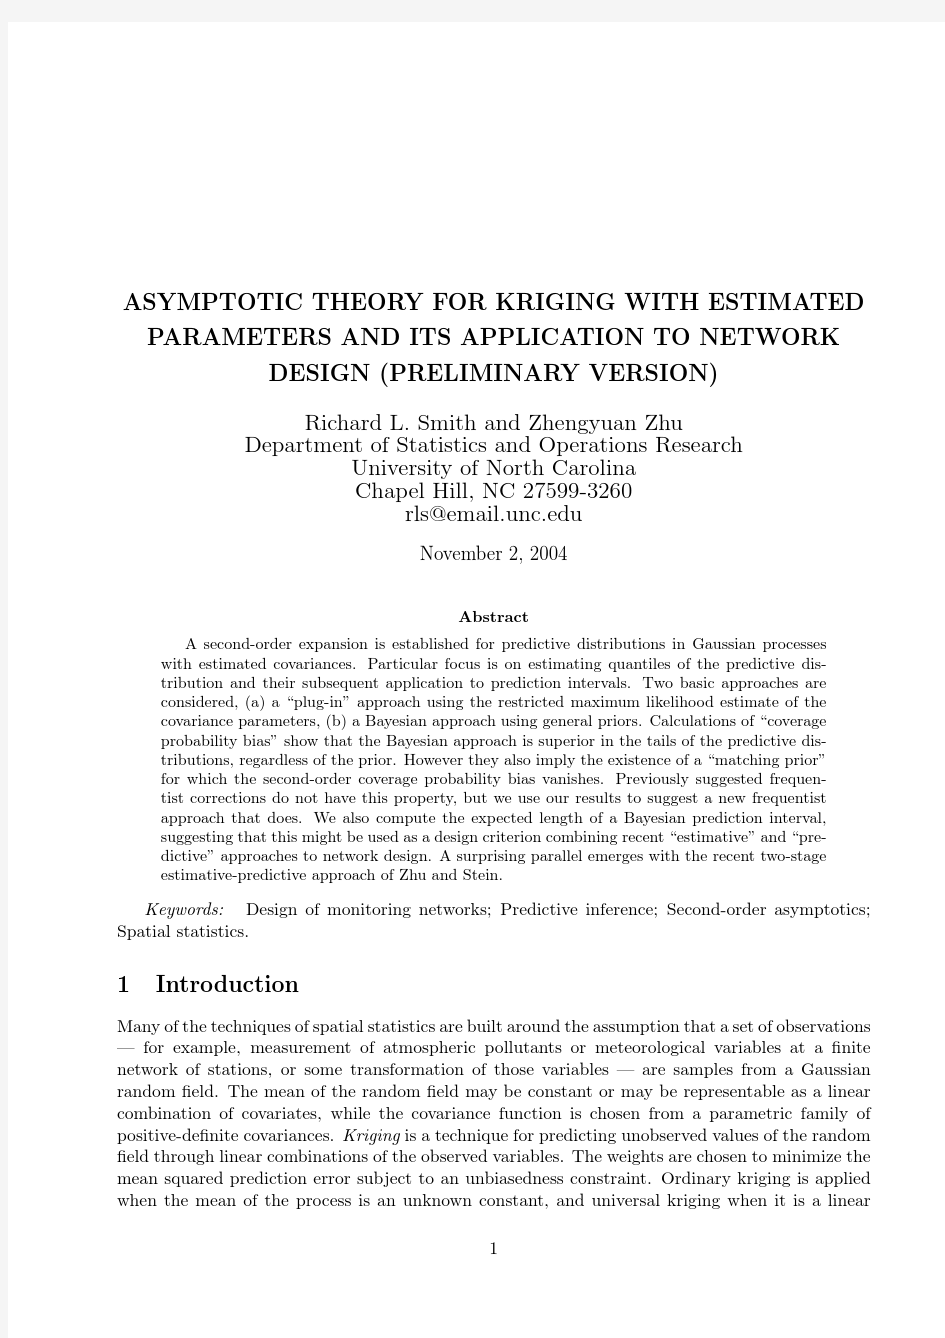 Asymptotic theory for kriging with estimated parameters and its application to network desi